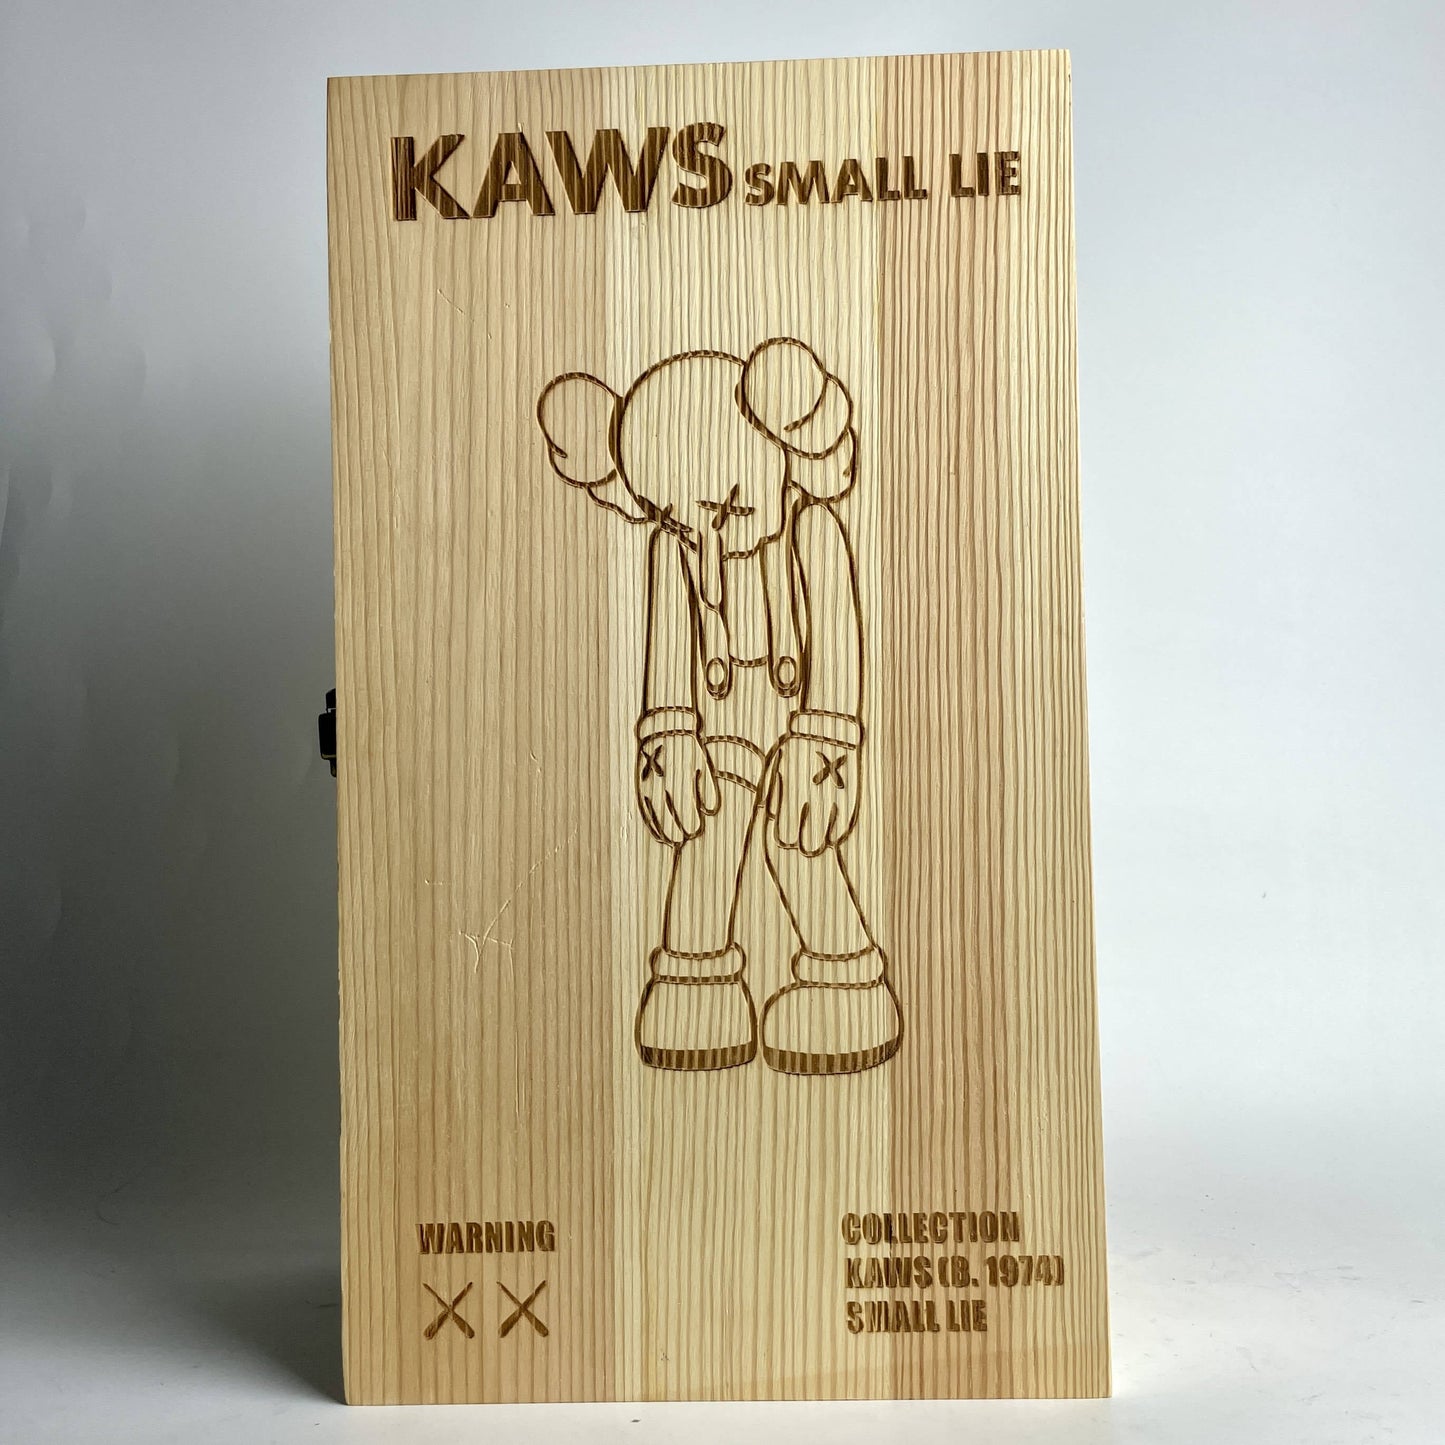 Hobby - 28cm 400% KAW Bearbrick Wooden Small Lie Anime Action Figure With Wooden Box